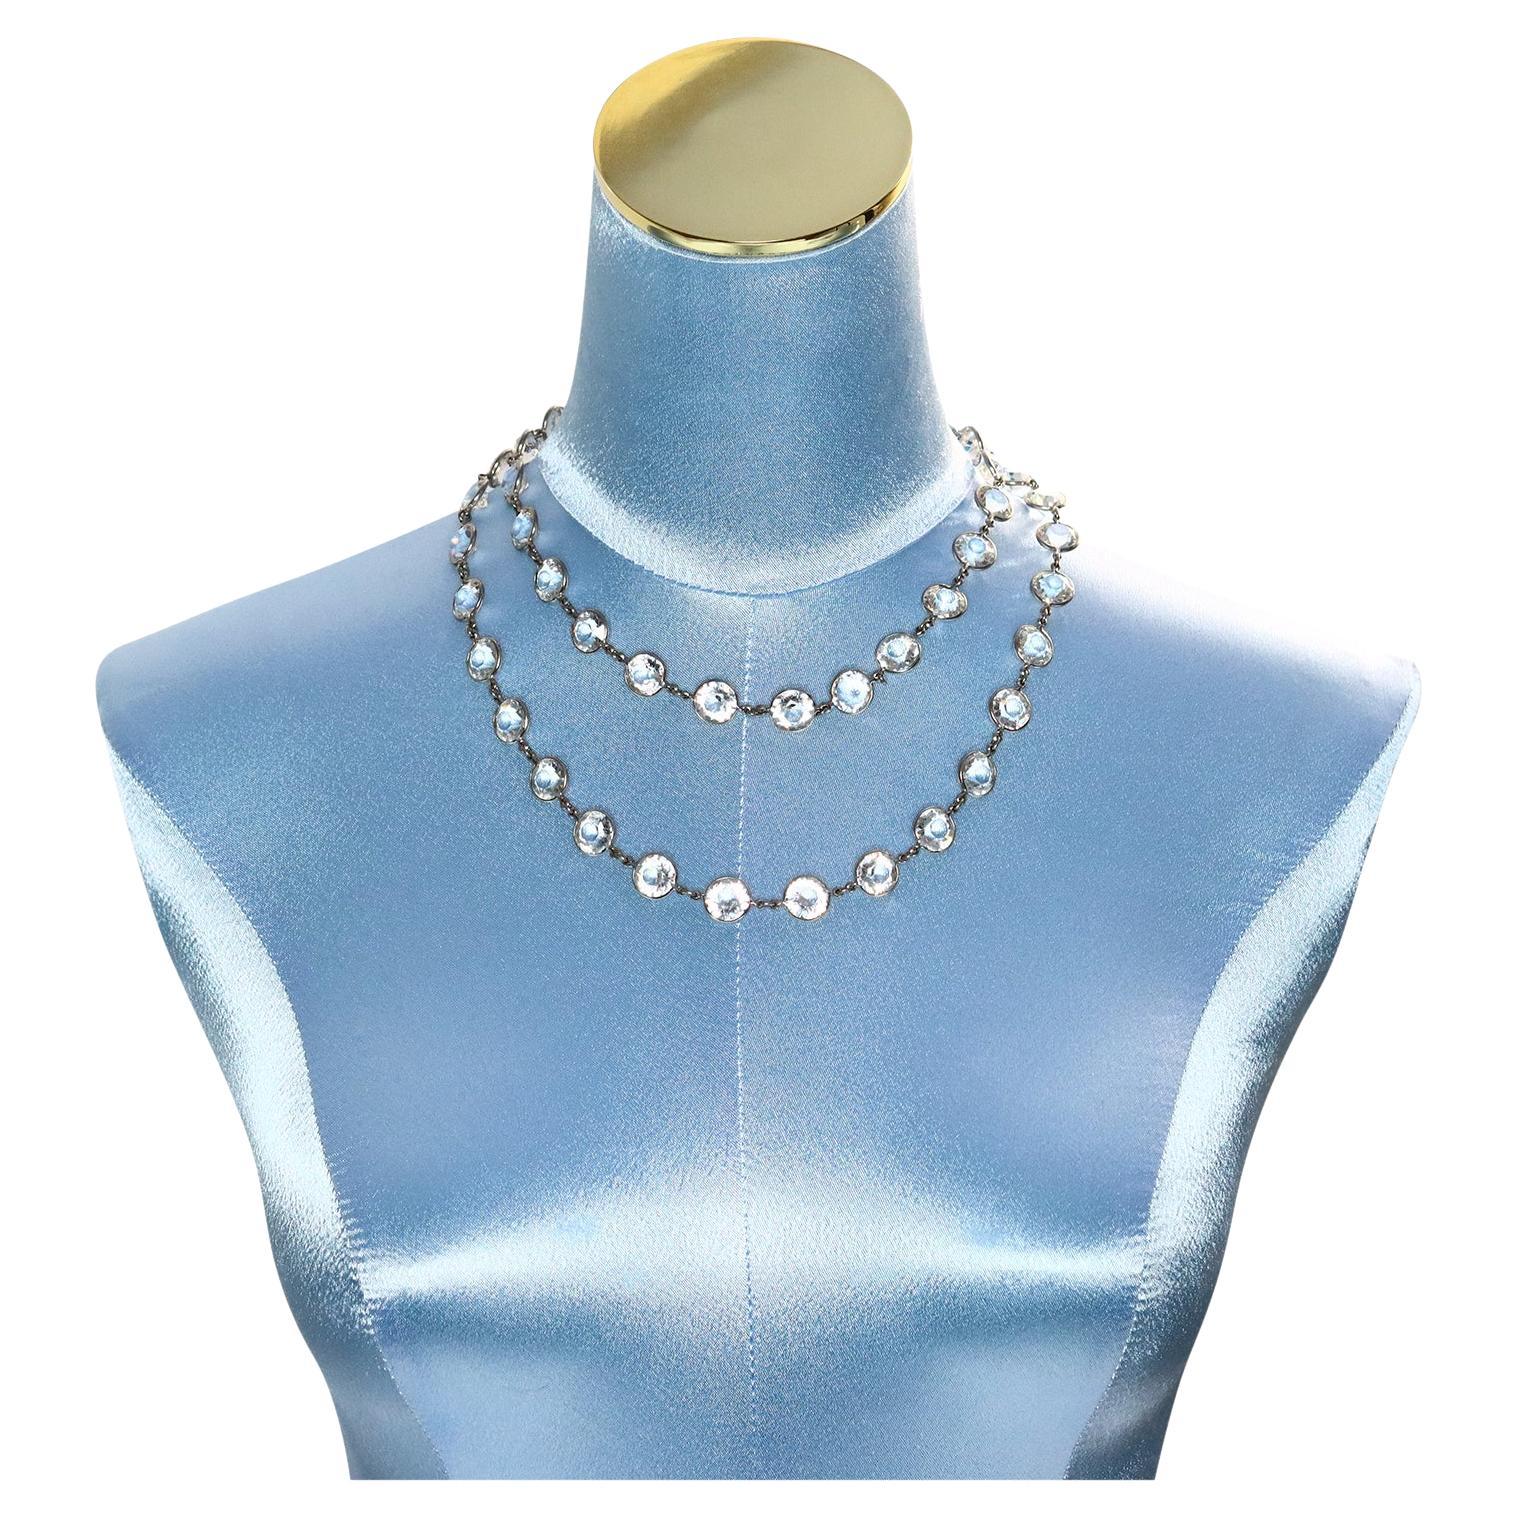 Vintage Open Back Crystal Sautoir Necklace.  Stunning. Should be one of those need be pieces in your wardrobe.  Can be wrapped double or worn long.  The crystals have been faceted like a diamond would be with the bottom portion at a tip so the